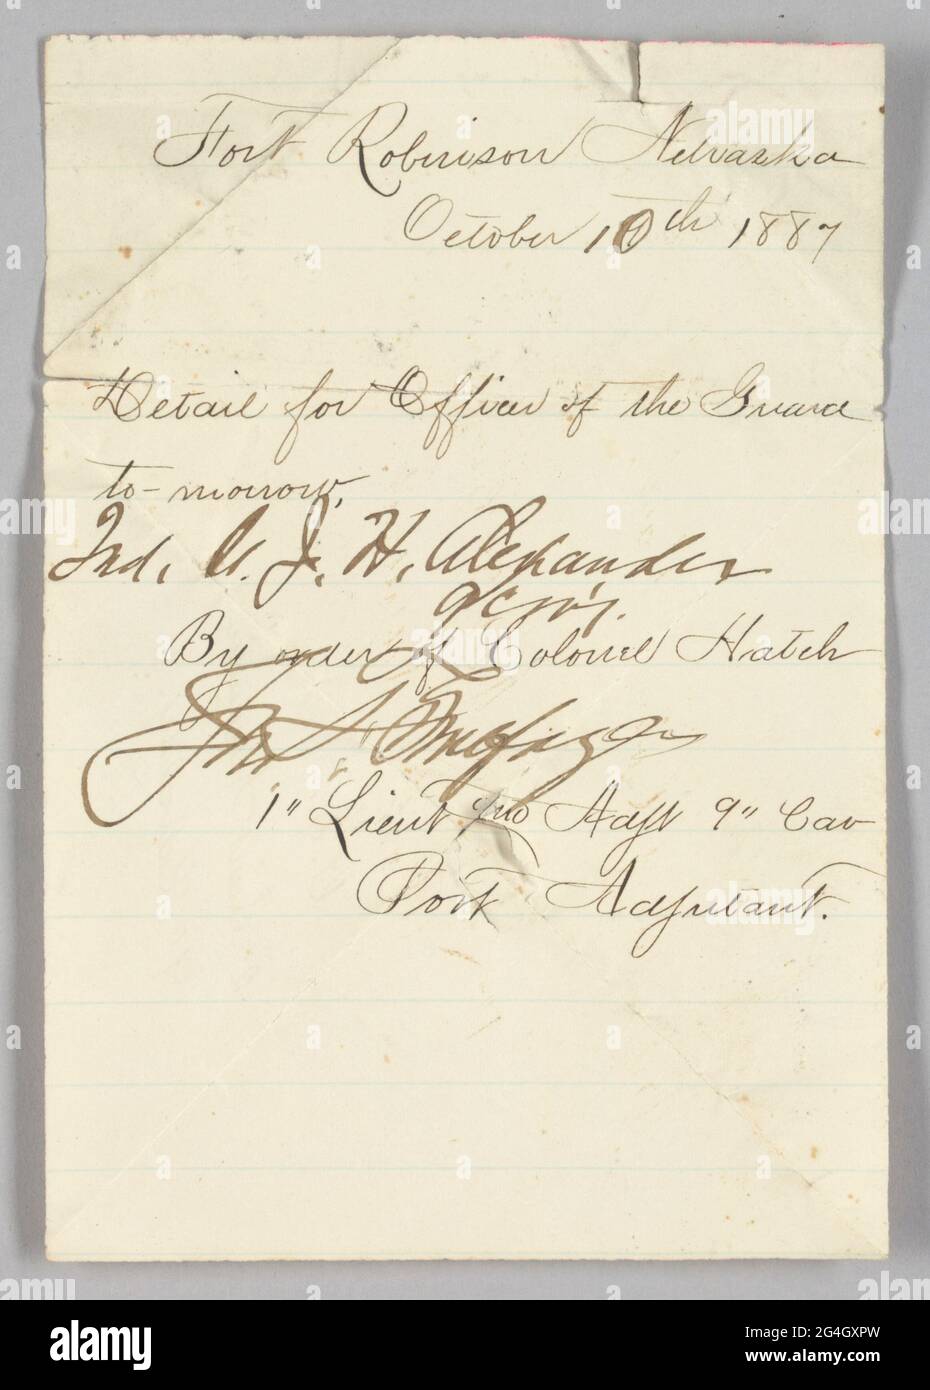 Hand-written order issued to second lieutenant John Hanks Alexander to report for Officers of the Guard duty at Fort Robinson, Nebraska on October 10, 1887. The document was written by an unidentified first lieutenant by order of Colonel Edward Hatch. The document was written in black ink on white paper and has several creases. Both sides of the document have writing. Alexander was the first African-American officer in the United States armed forces to hold a regular command position. Stock Photo